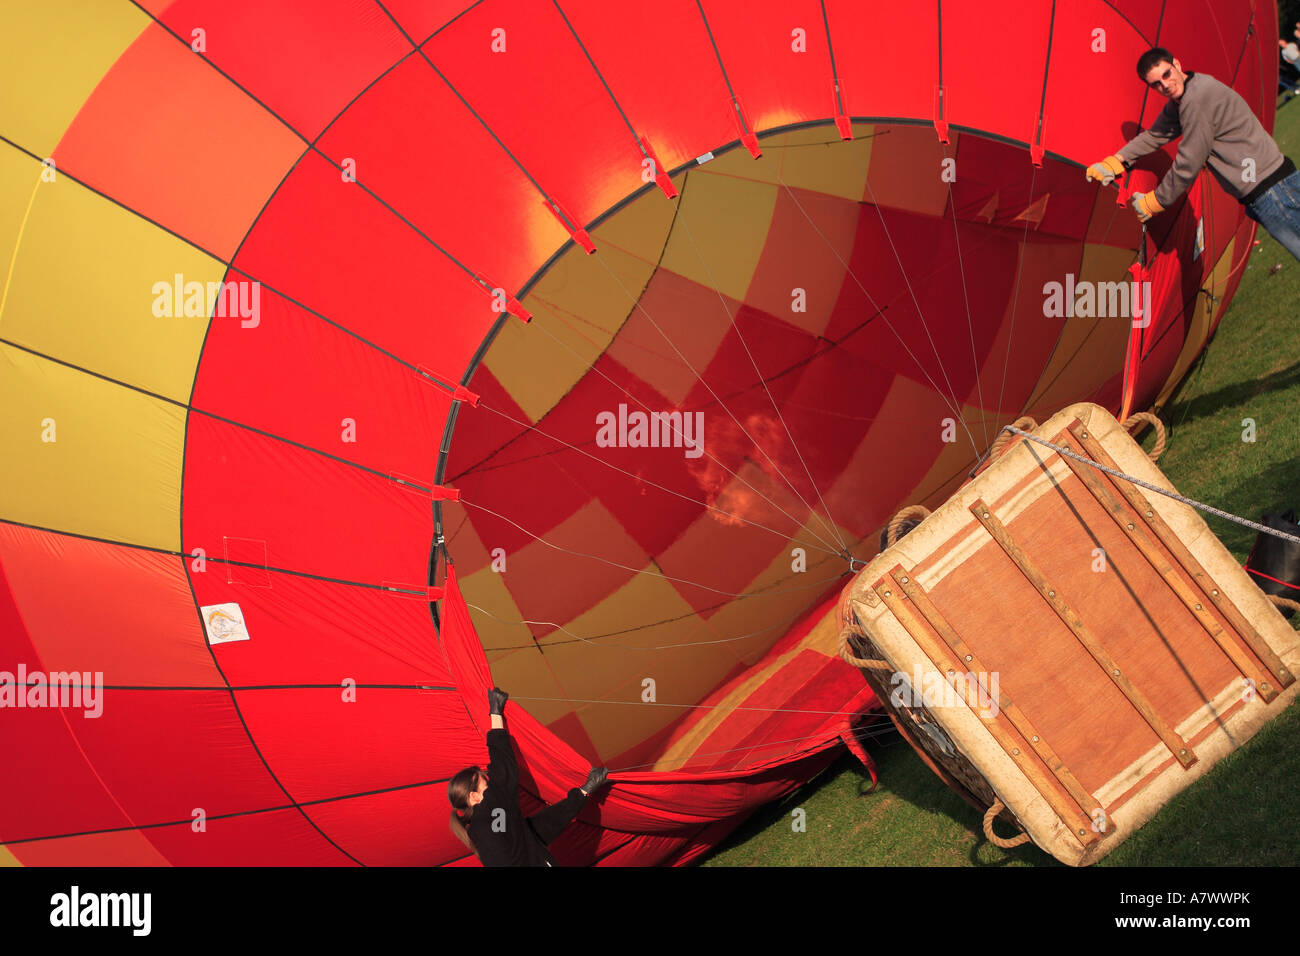 Hot air balloon being inflated and prepared for launch ballooning Stock Photo